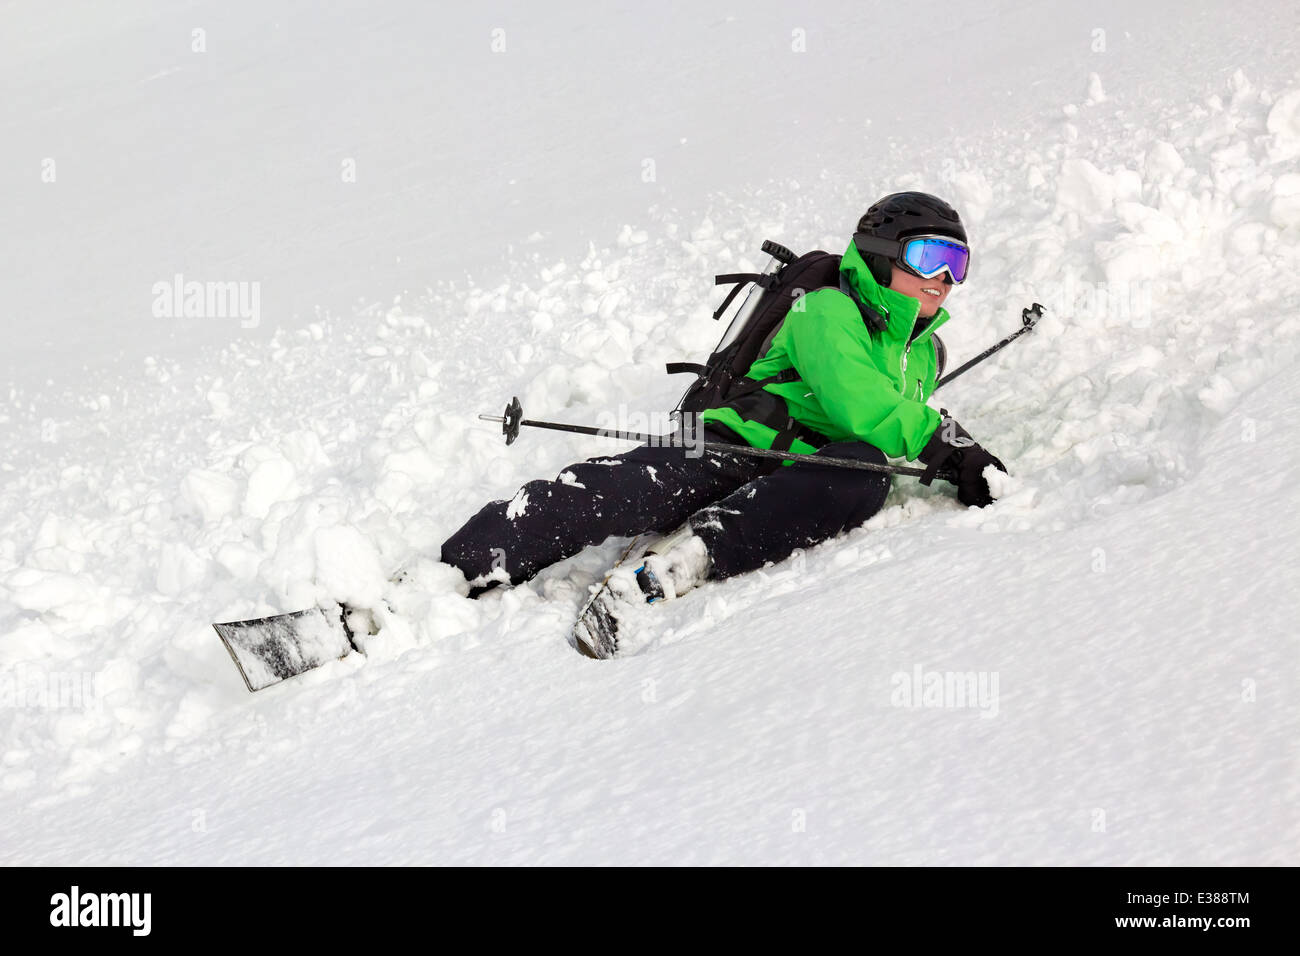 Skier In Powder Snow Falling Banque d'image et photos - Alamy